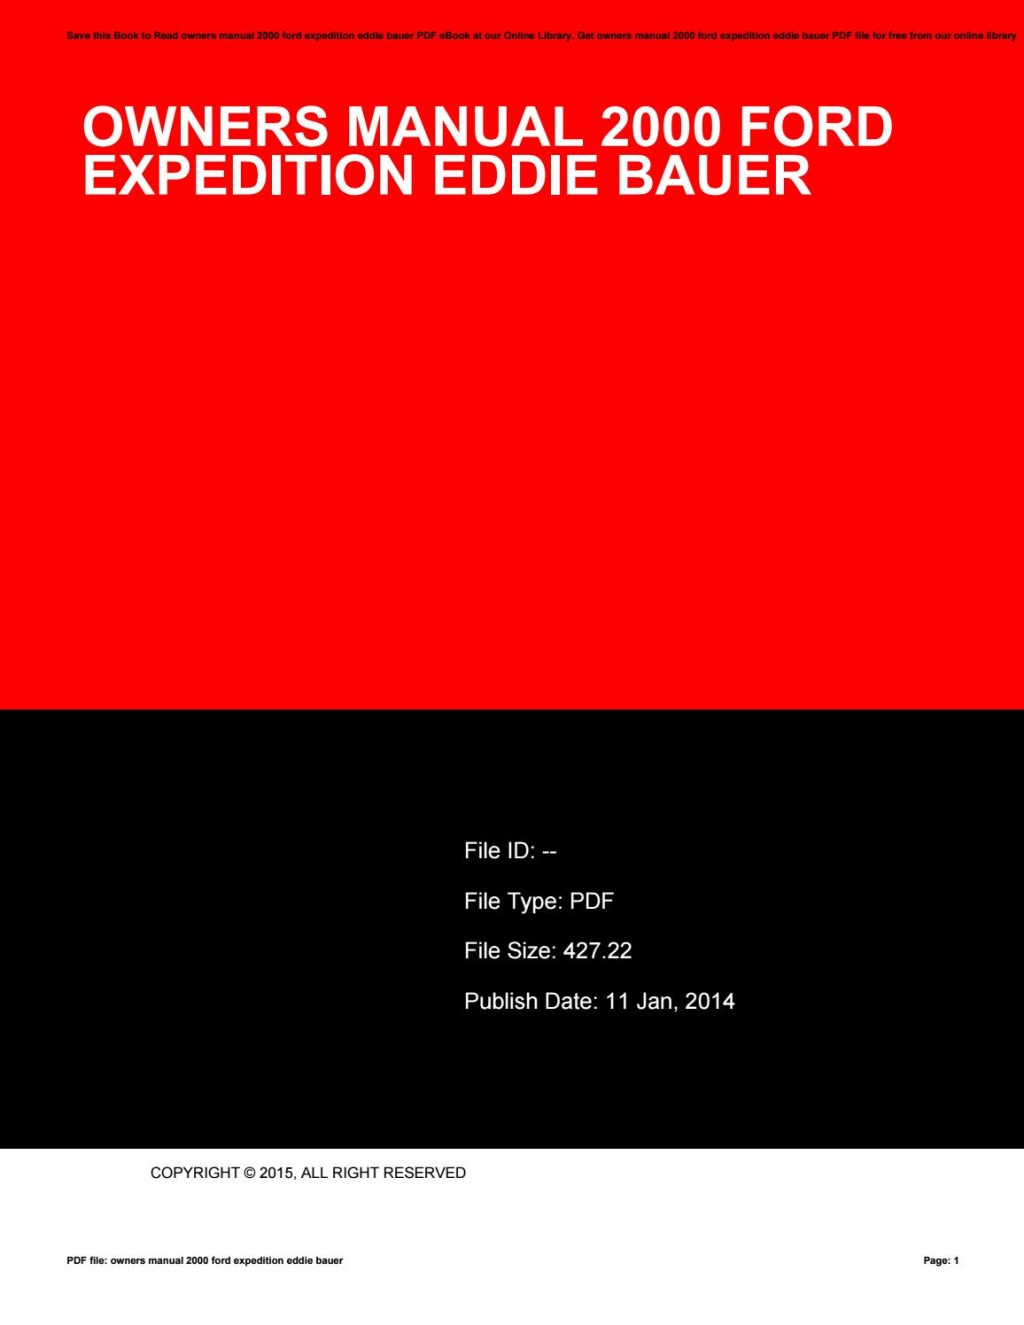 Picture of: Owners manual  ford expedition eddie bauer by